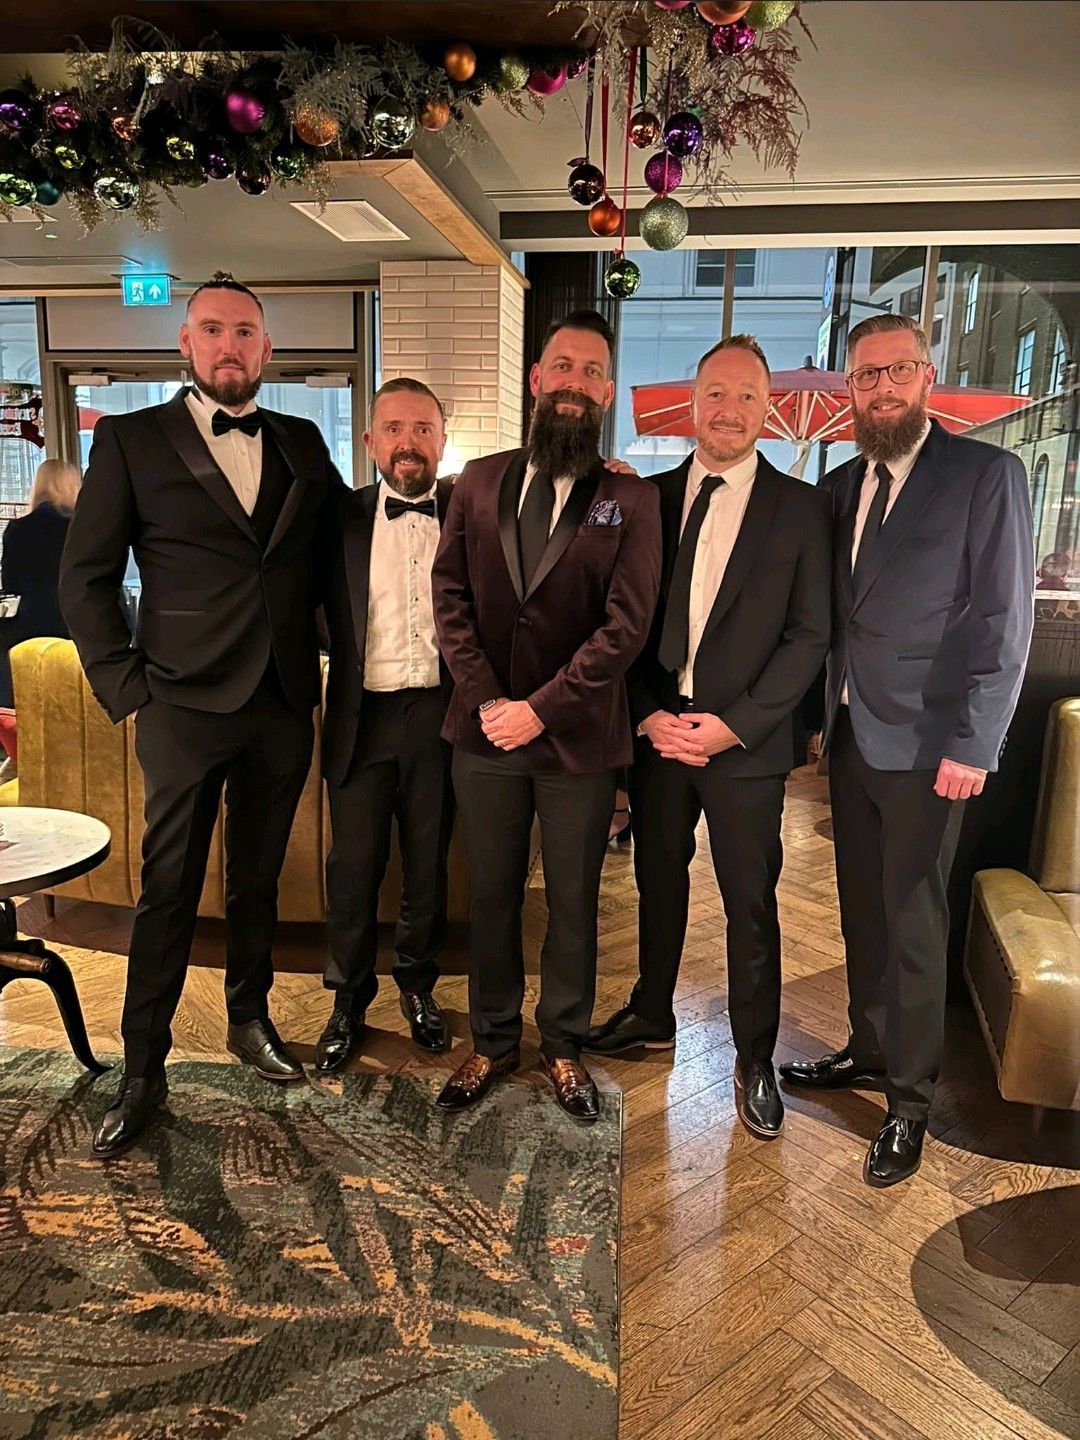 Pictured in Black Tie are Site Support Nigel Kennedy, Head of Technical and Customer Service Dean Asher and Head of Marketing Jason Nightingale with representatives from Bubble Darren Hunter and Chris Peacock. They are stood in a bar beneath a festive garland adorned with Baubles.